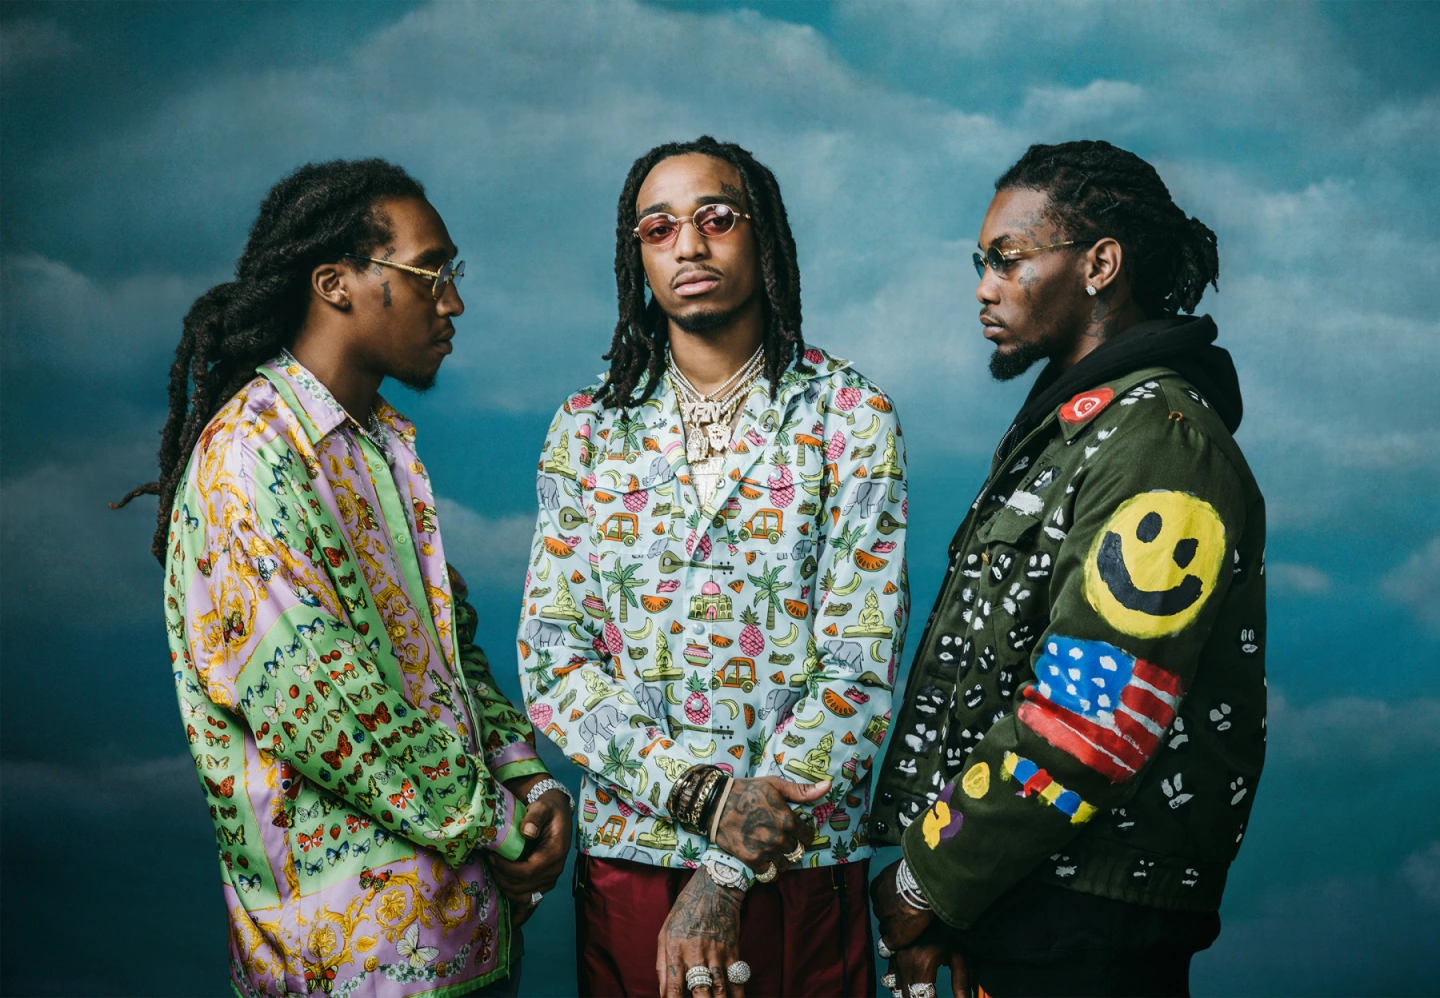 Image of Offset, Quavo and Takeoff members of Migos